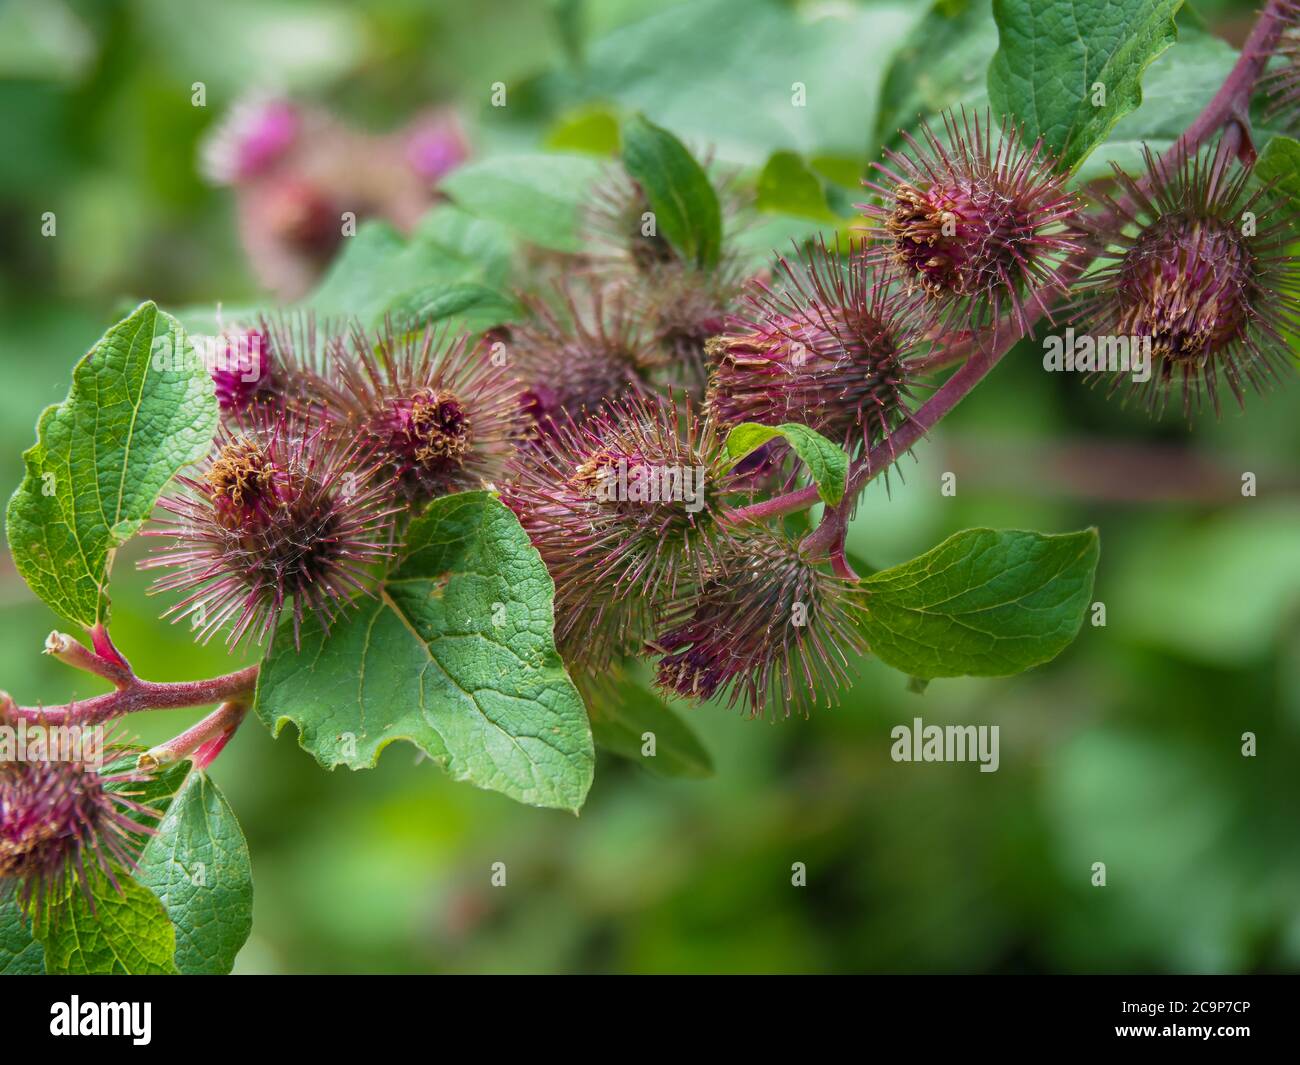 Closeup of purple flowers and green leaves of burdock, Arctium, growing in a hedgerow Stock Photo